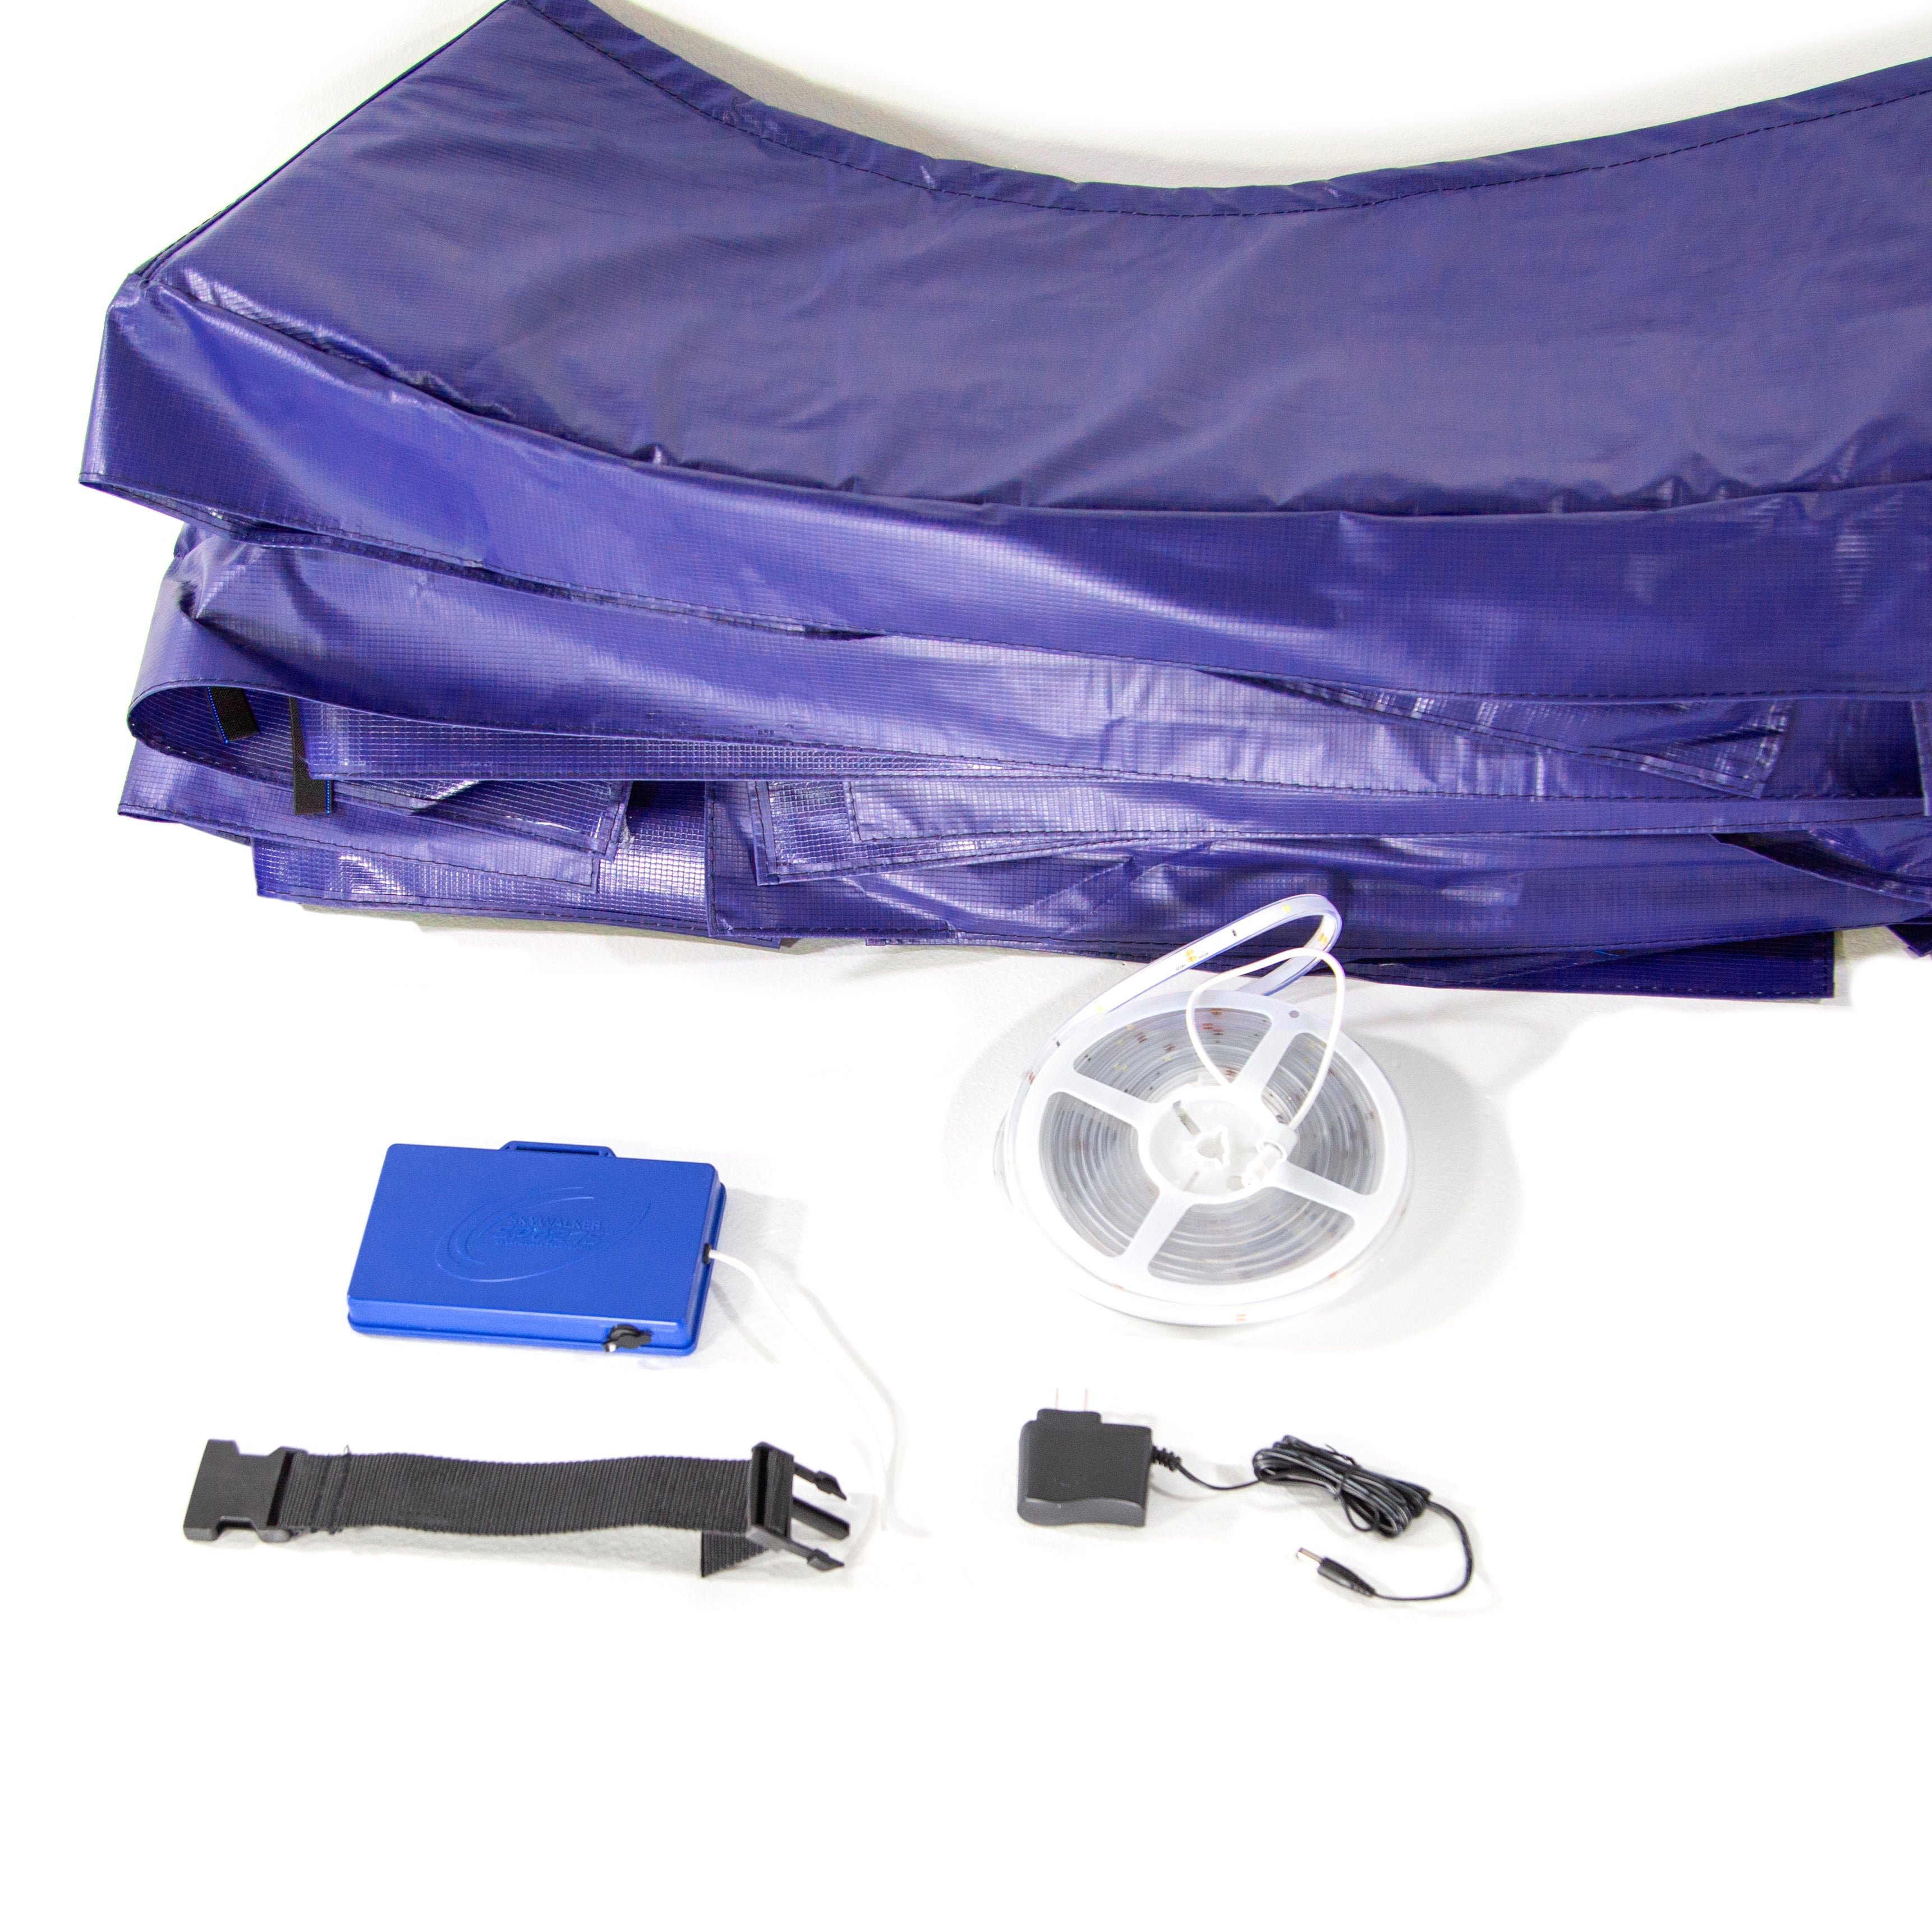 16-foot round blue spring pad with LED light kit. 